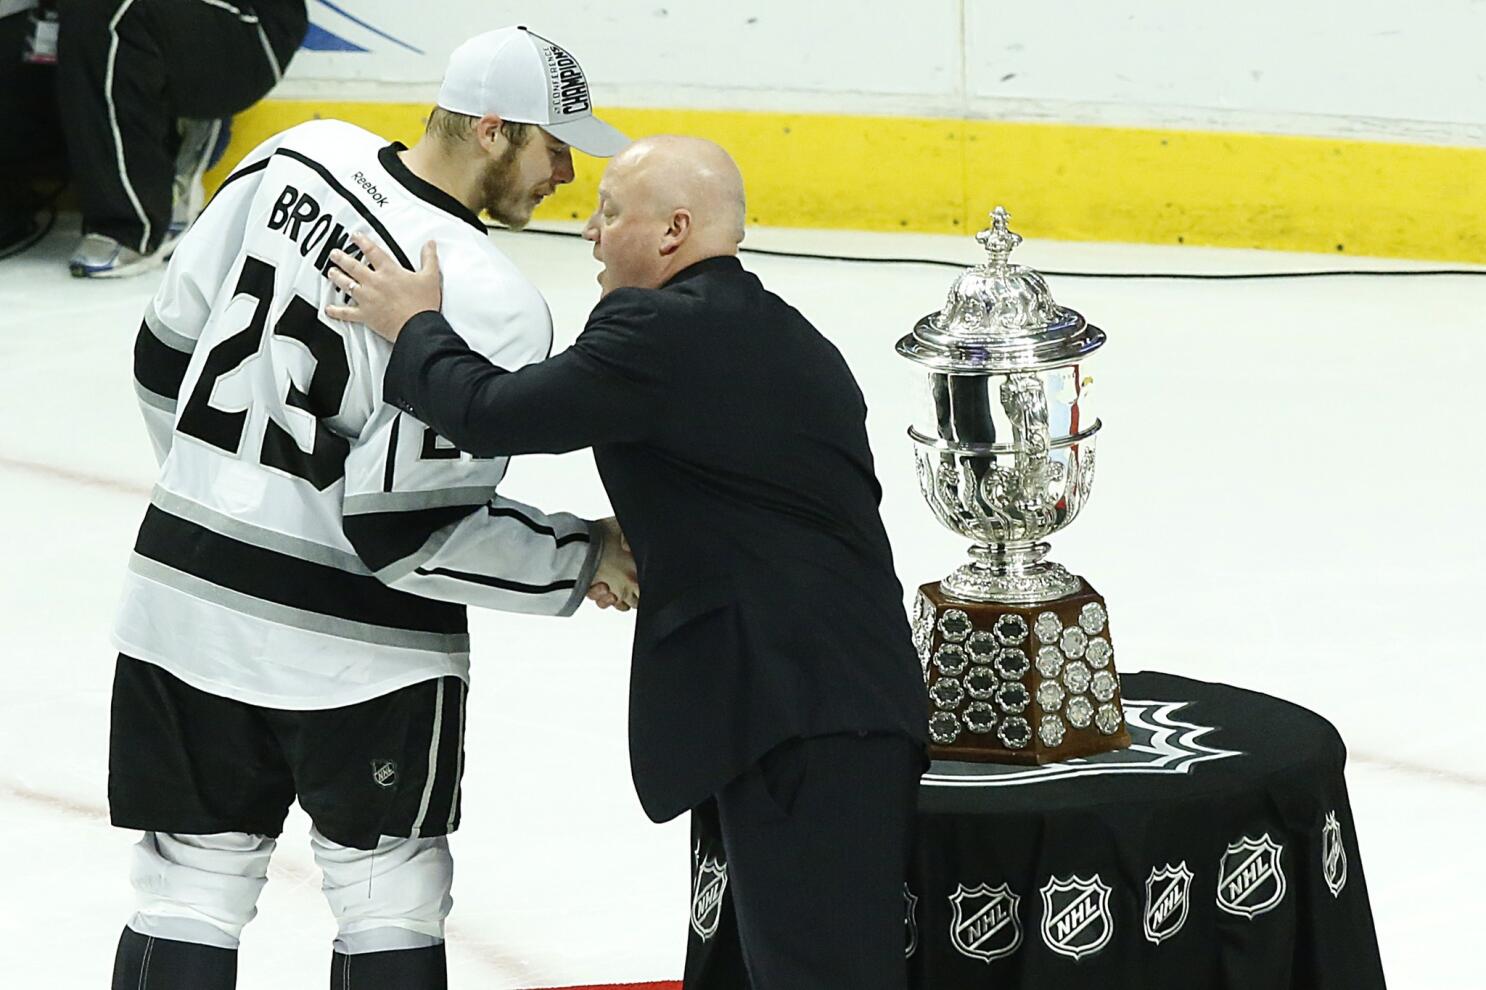 Kings should make sure to enjoy their first Stanley Cup